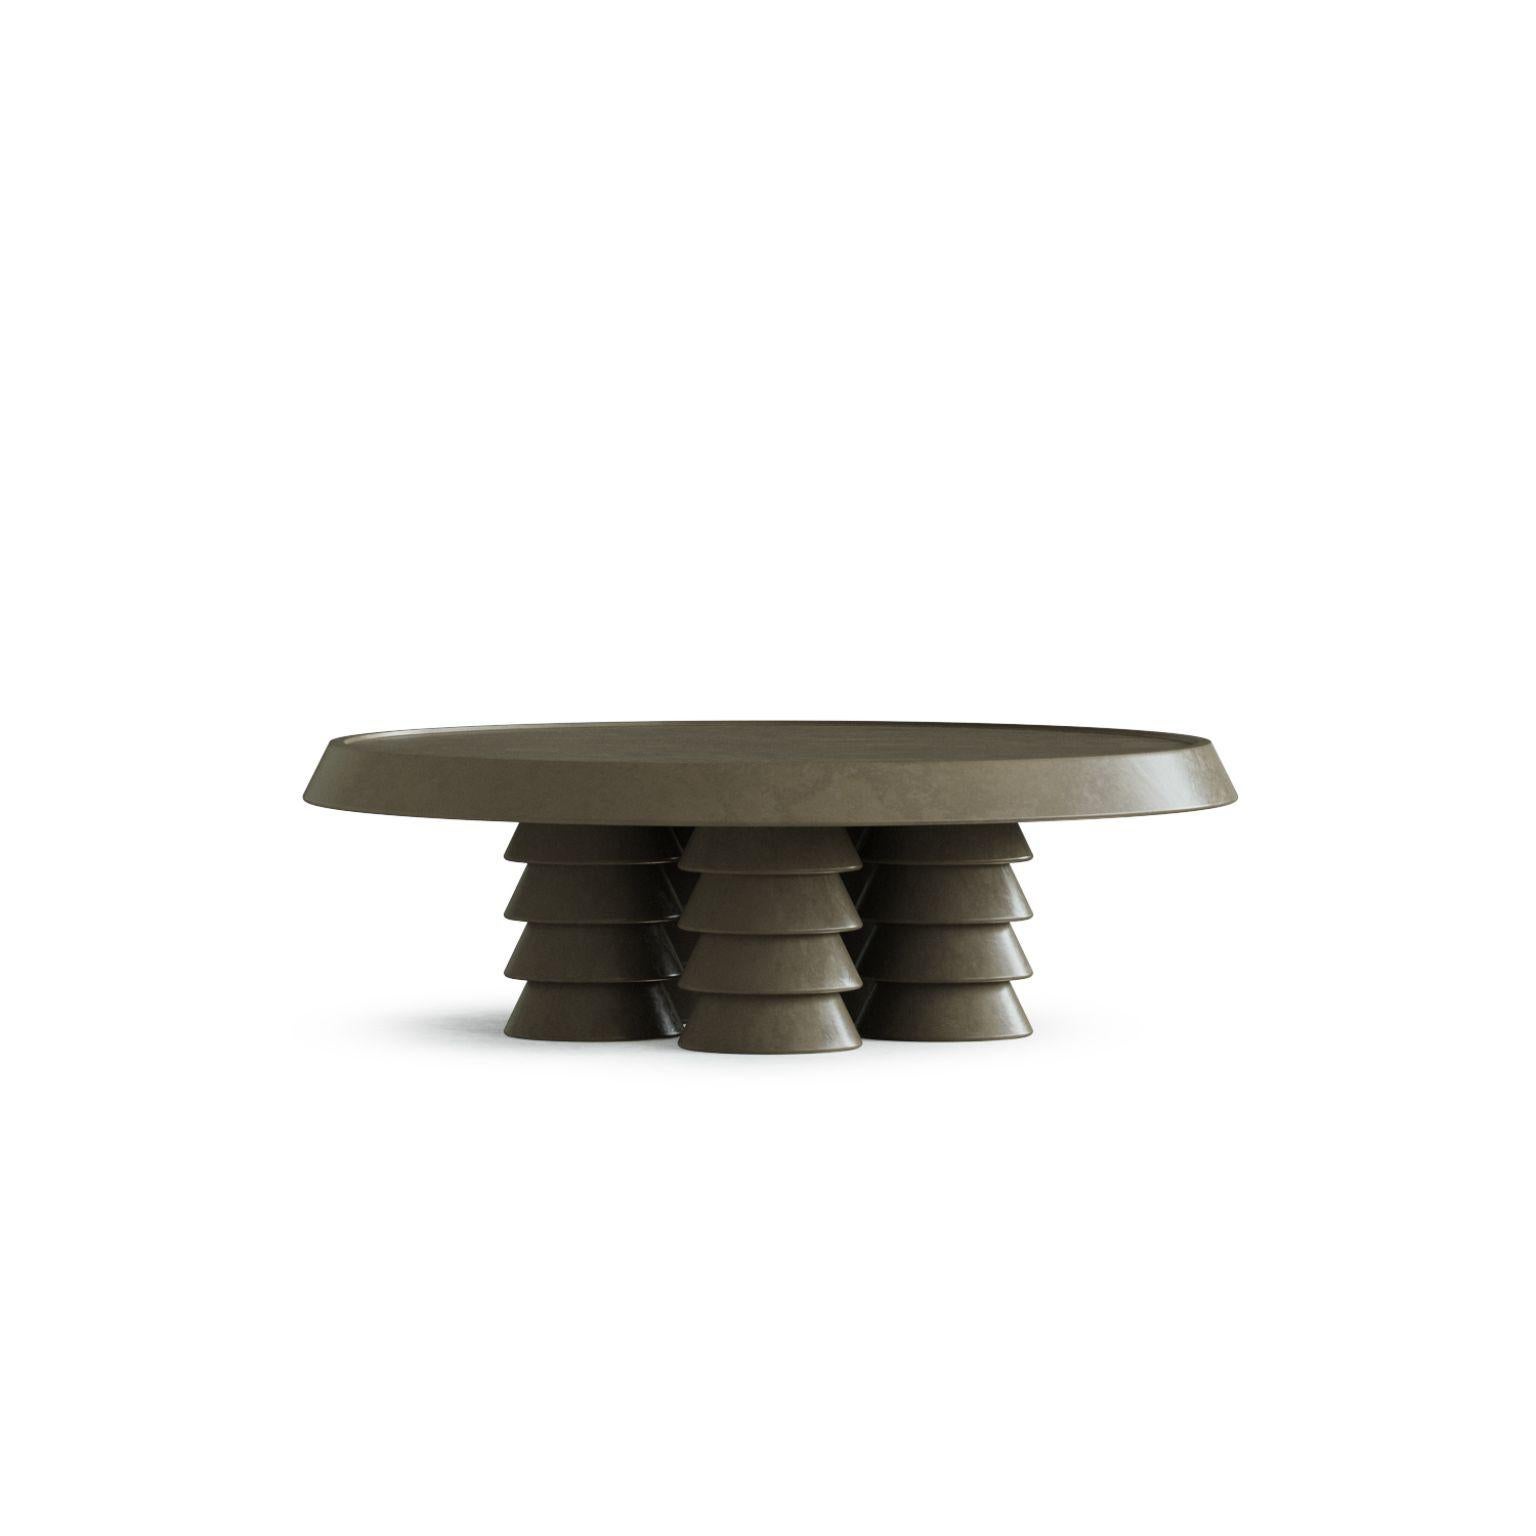 Trigono Dark Grey Coffee Table by Studio Anansi
Dimensions: D122 x W122 x H38 cm
Materials: limestone
Custom stones available. Please contact us.

Studio ANANSI, founded by Evan Jerry in 2018, represents a reection on modernity with a nod to the